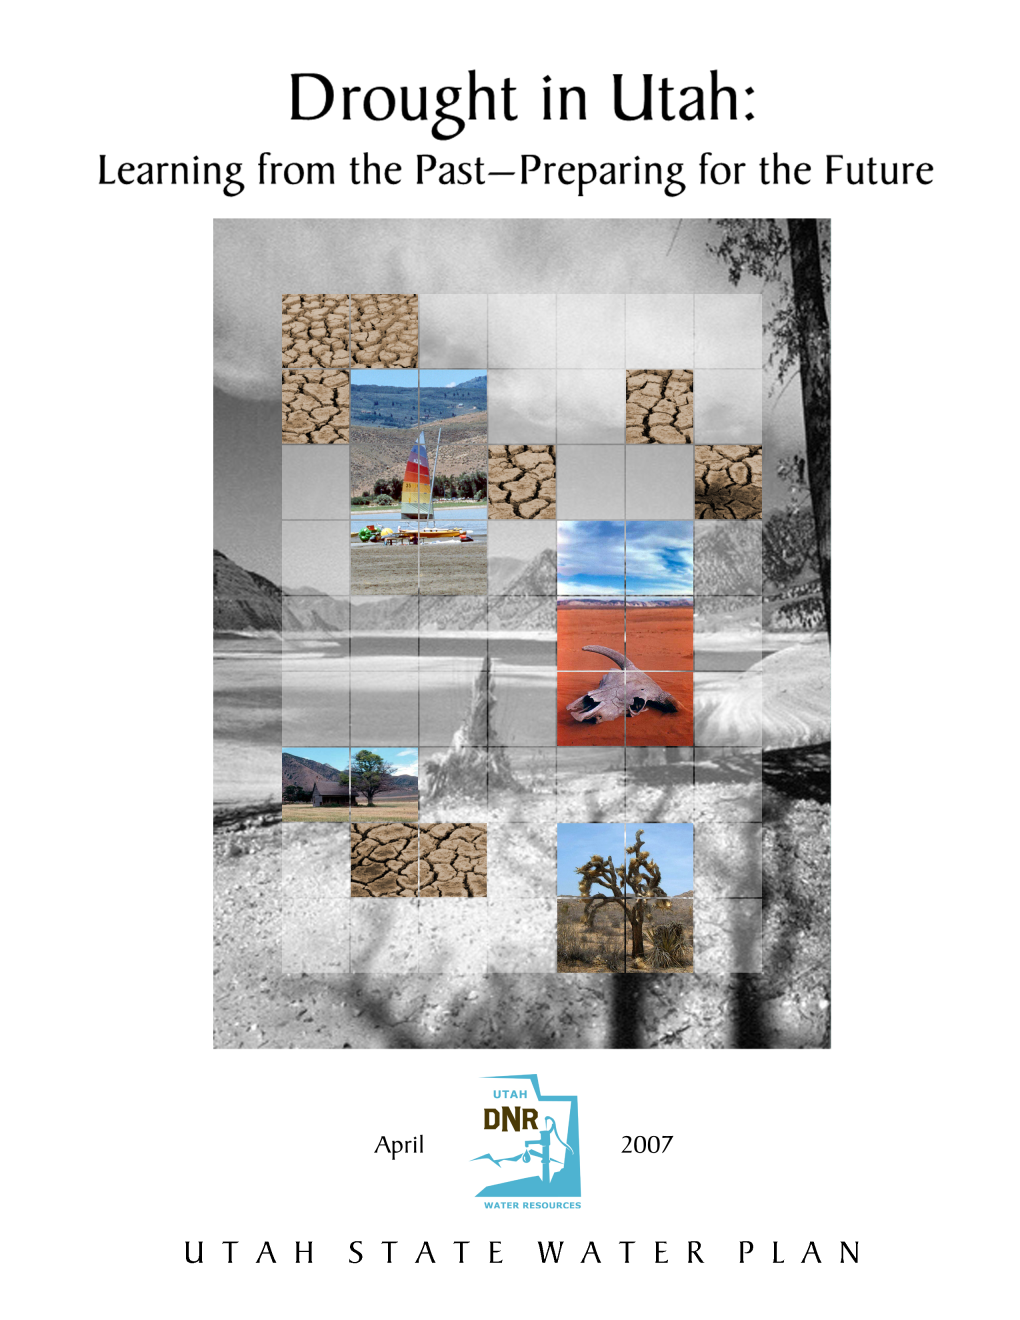 Drought in Utah: Learning from the Past—Preparing for the Future